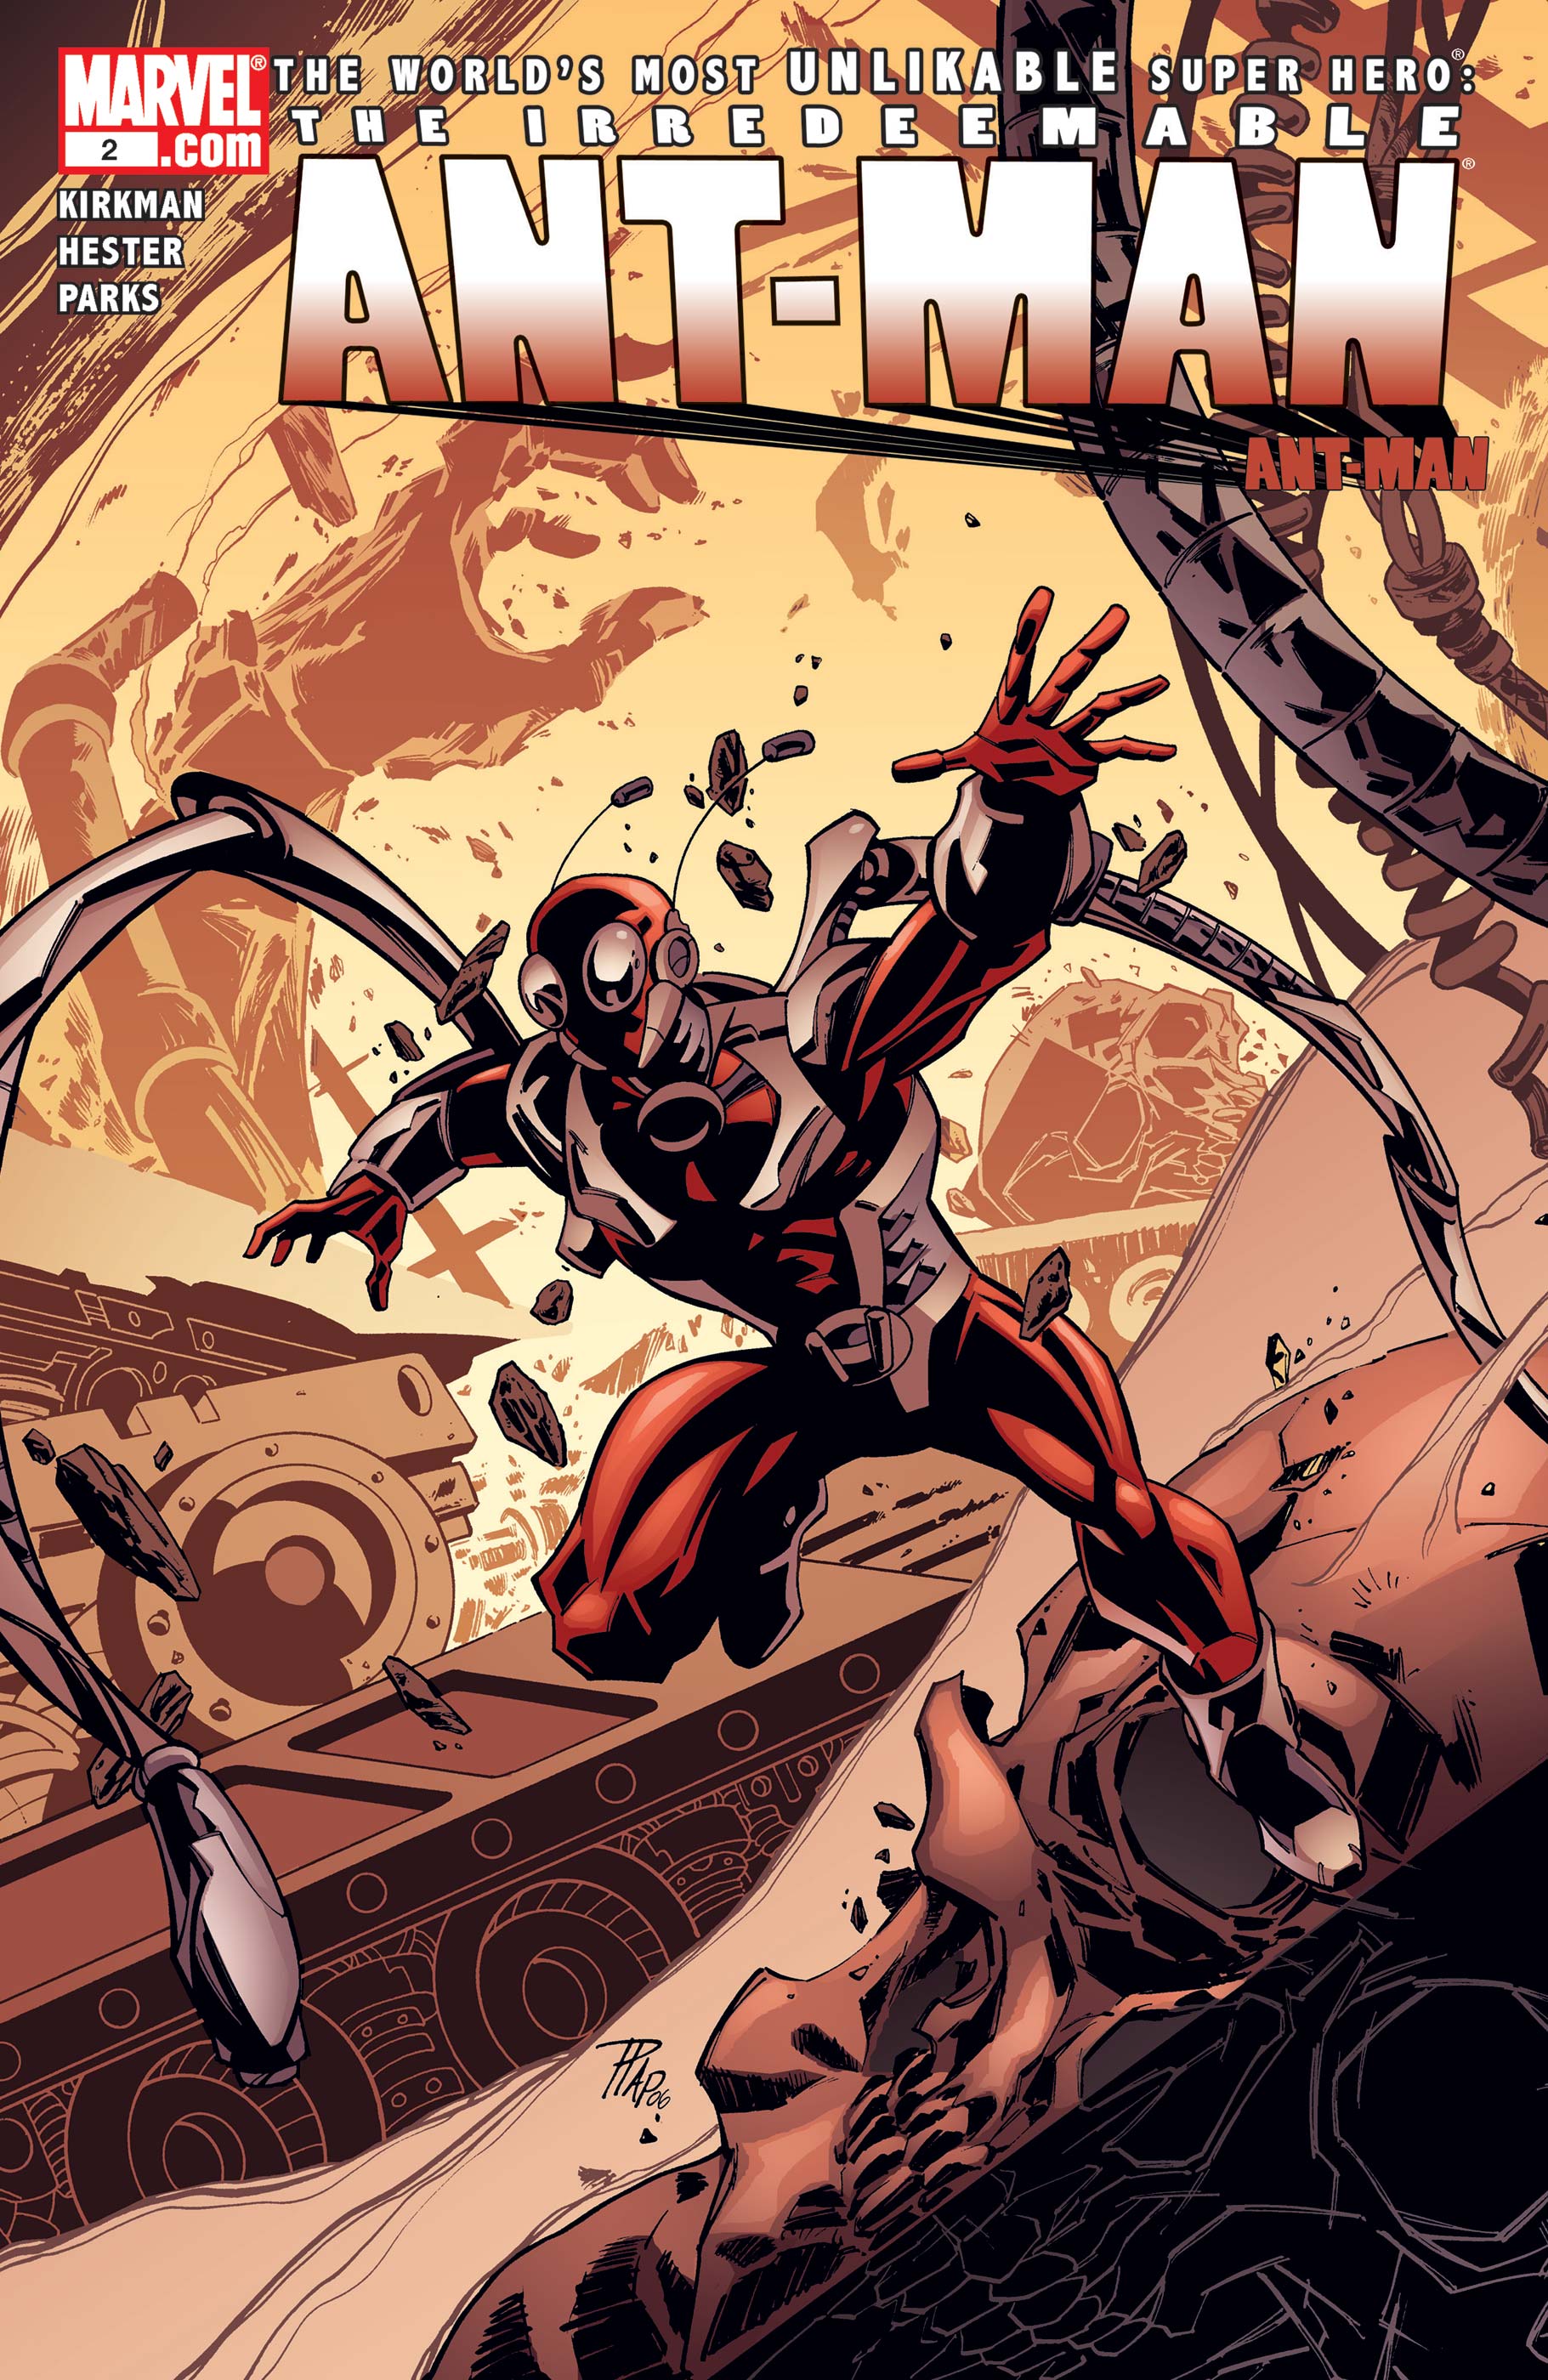 Irredeemable Ant-Man (2006) #2